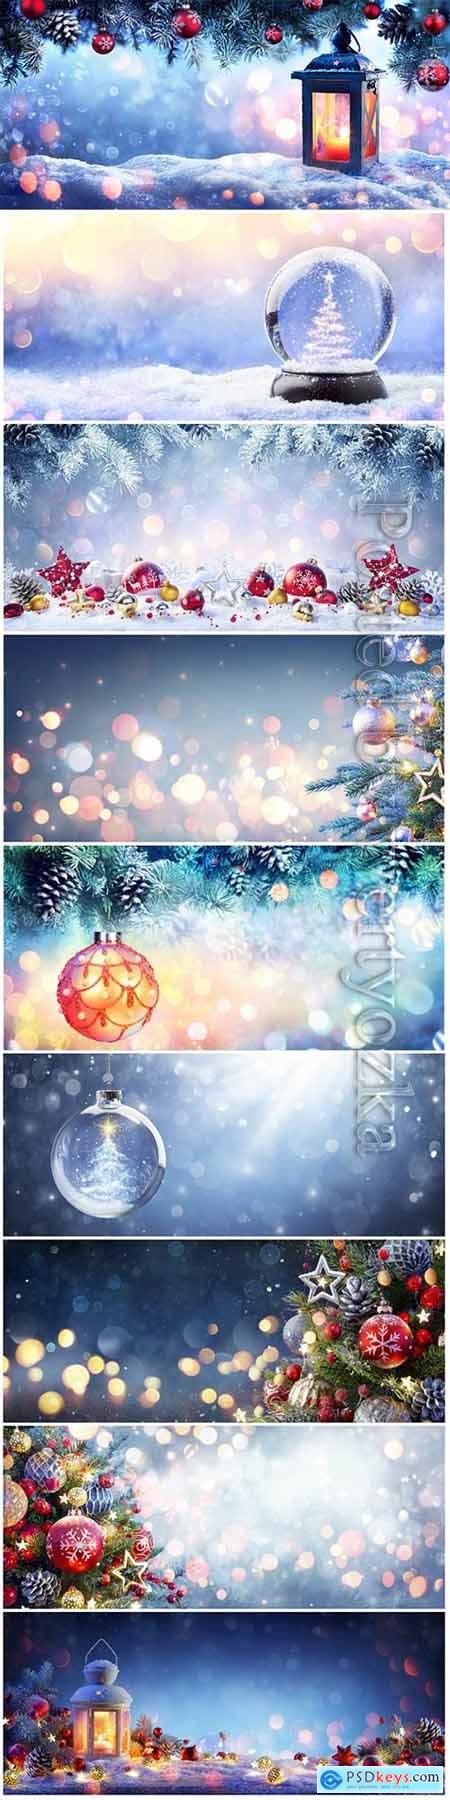 Wonderful New Year and Christmas Backgrounds